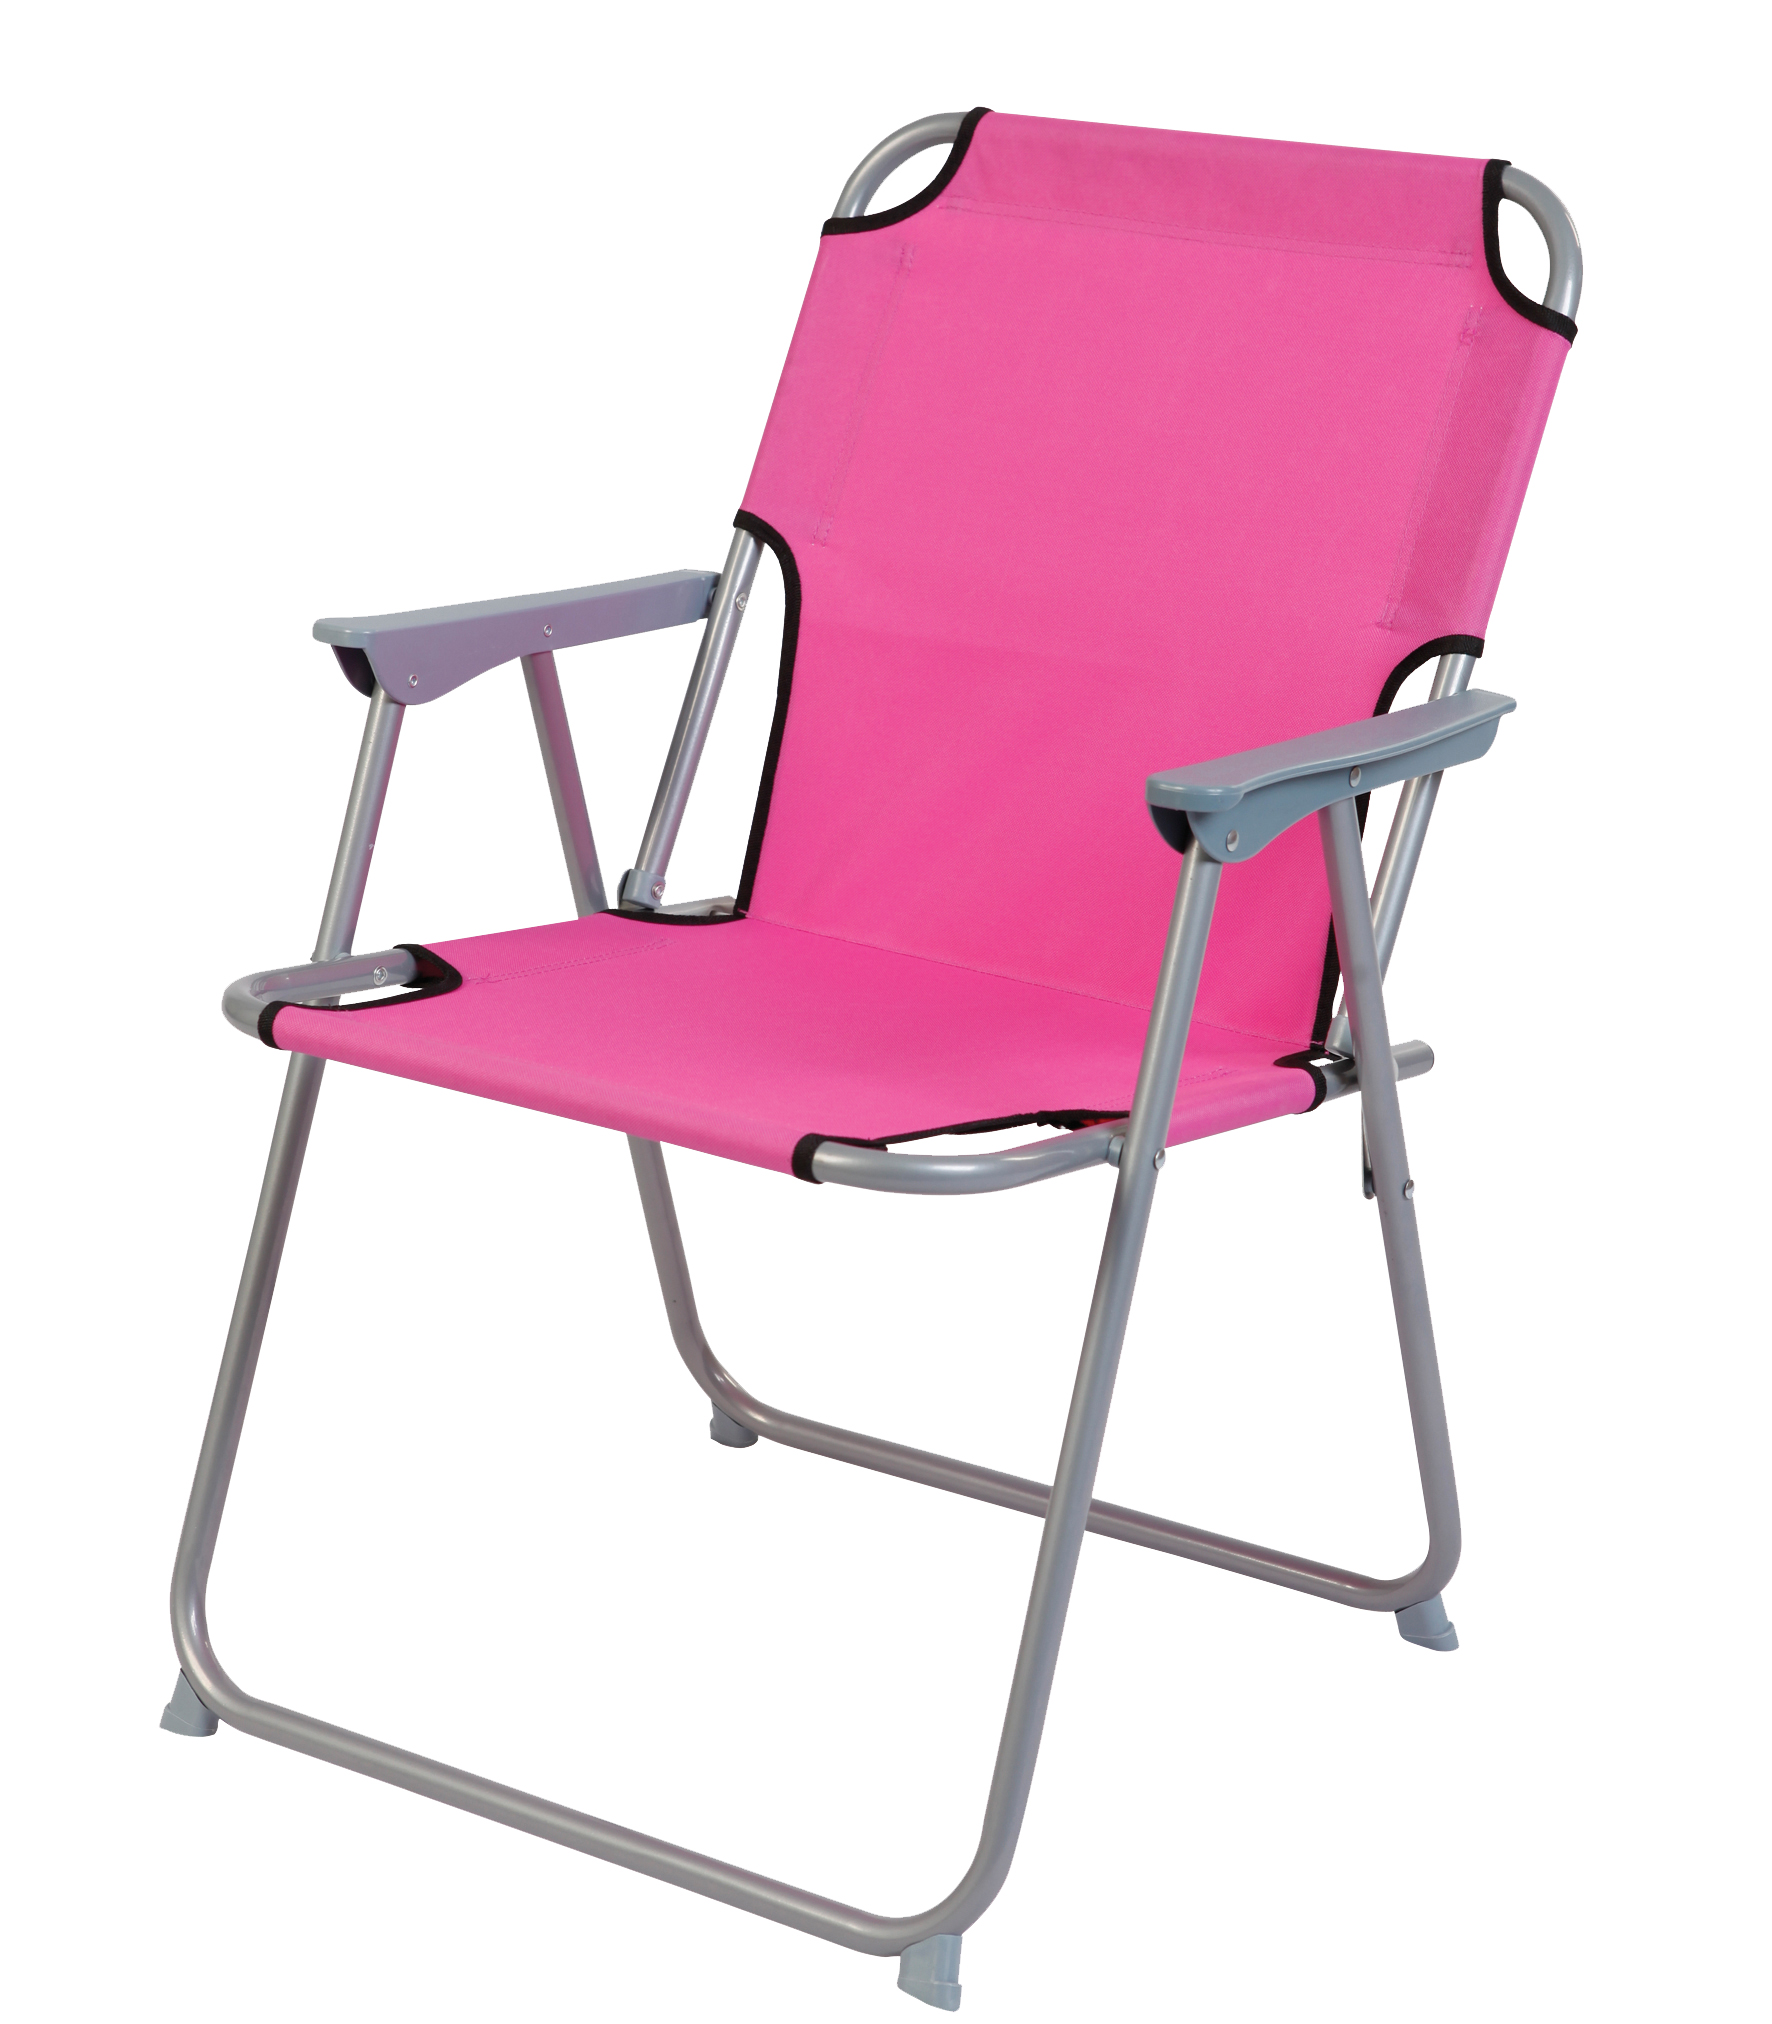 CAMPINGSESSEL OXFORD FARBE PINK